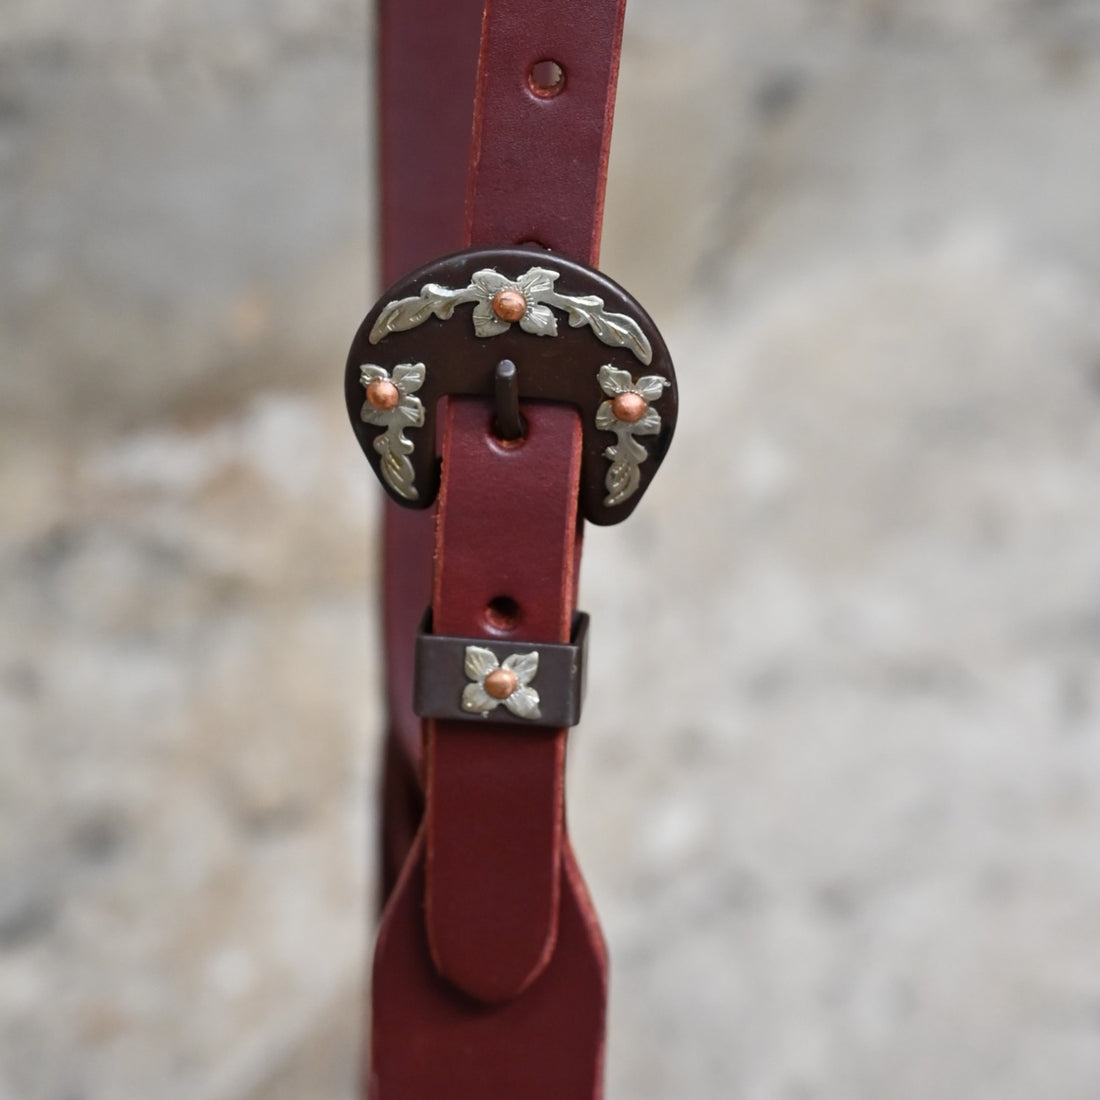 Split Ear Headstall with Brown Iron Buckle view of buckle close up